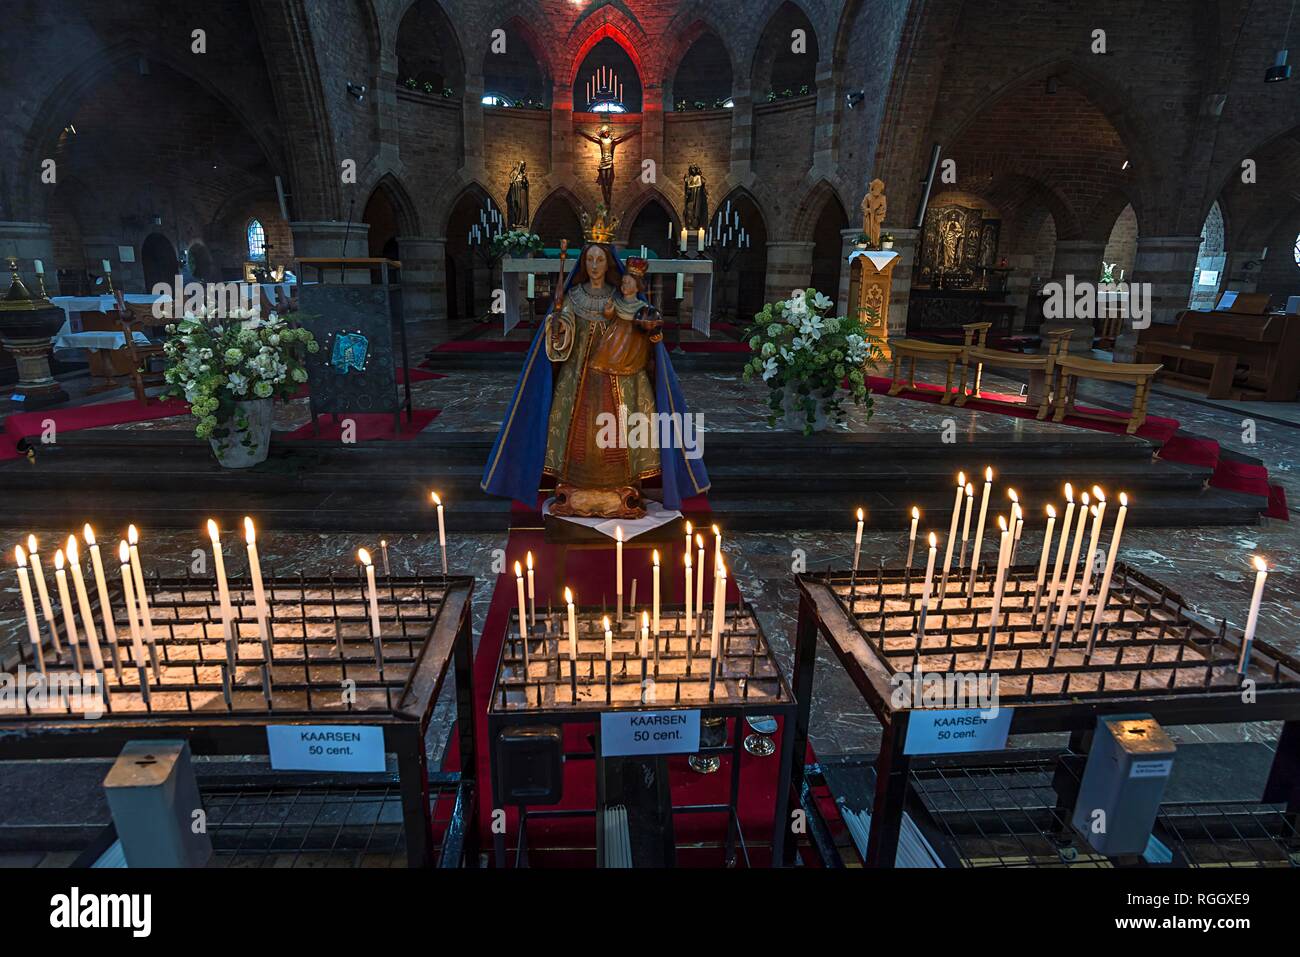 Altar of Mary with sacrificial candles, St. Jacobuskerk, Enschede, Netherlands Stock Photo